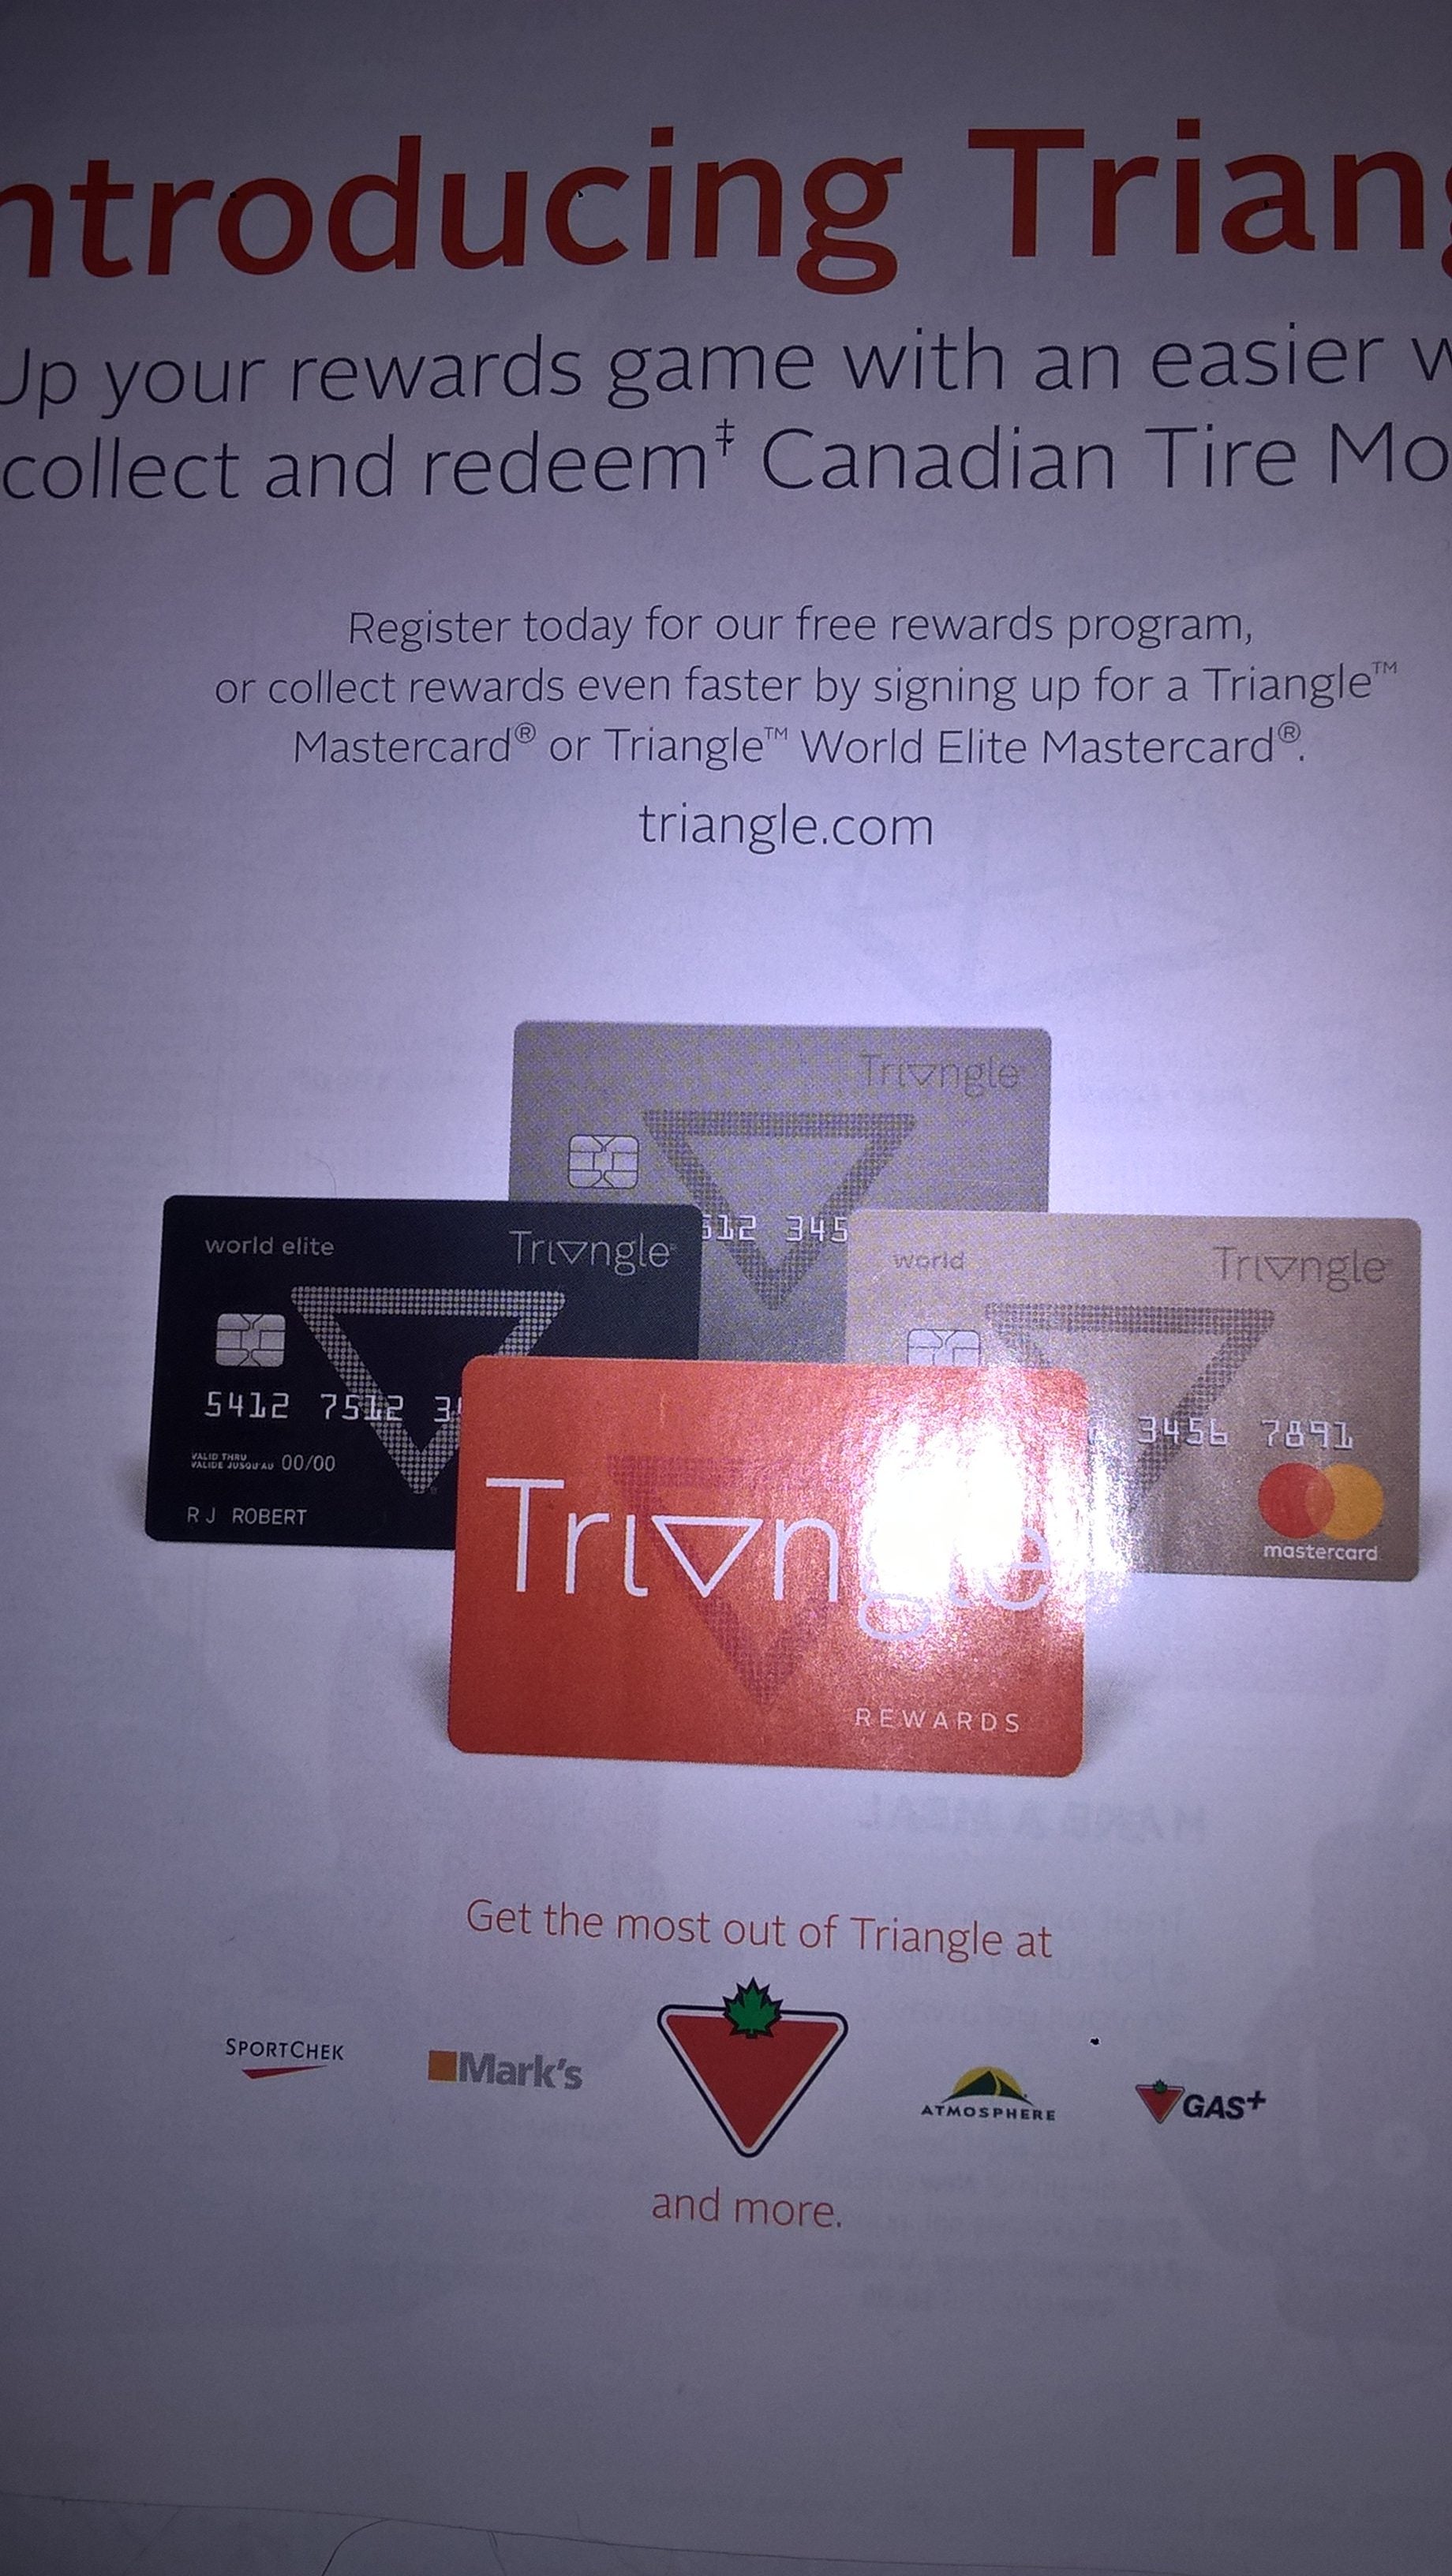 Canadian Tire Rewards: How to earn CT Money with the Triangle Rewards  program and Triangle Mastercard - MoneySense